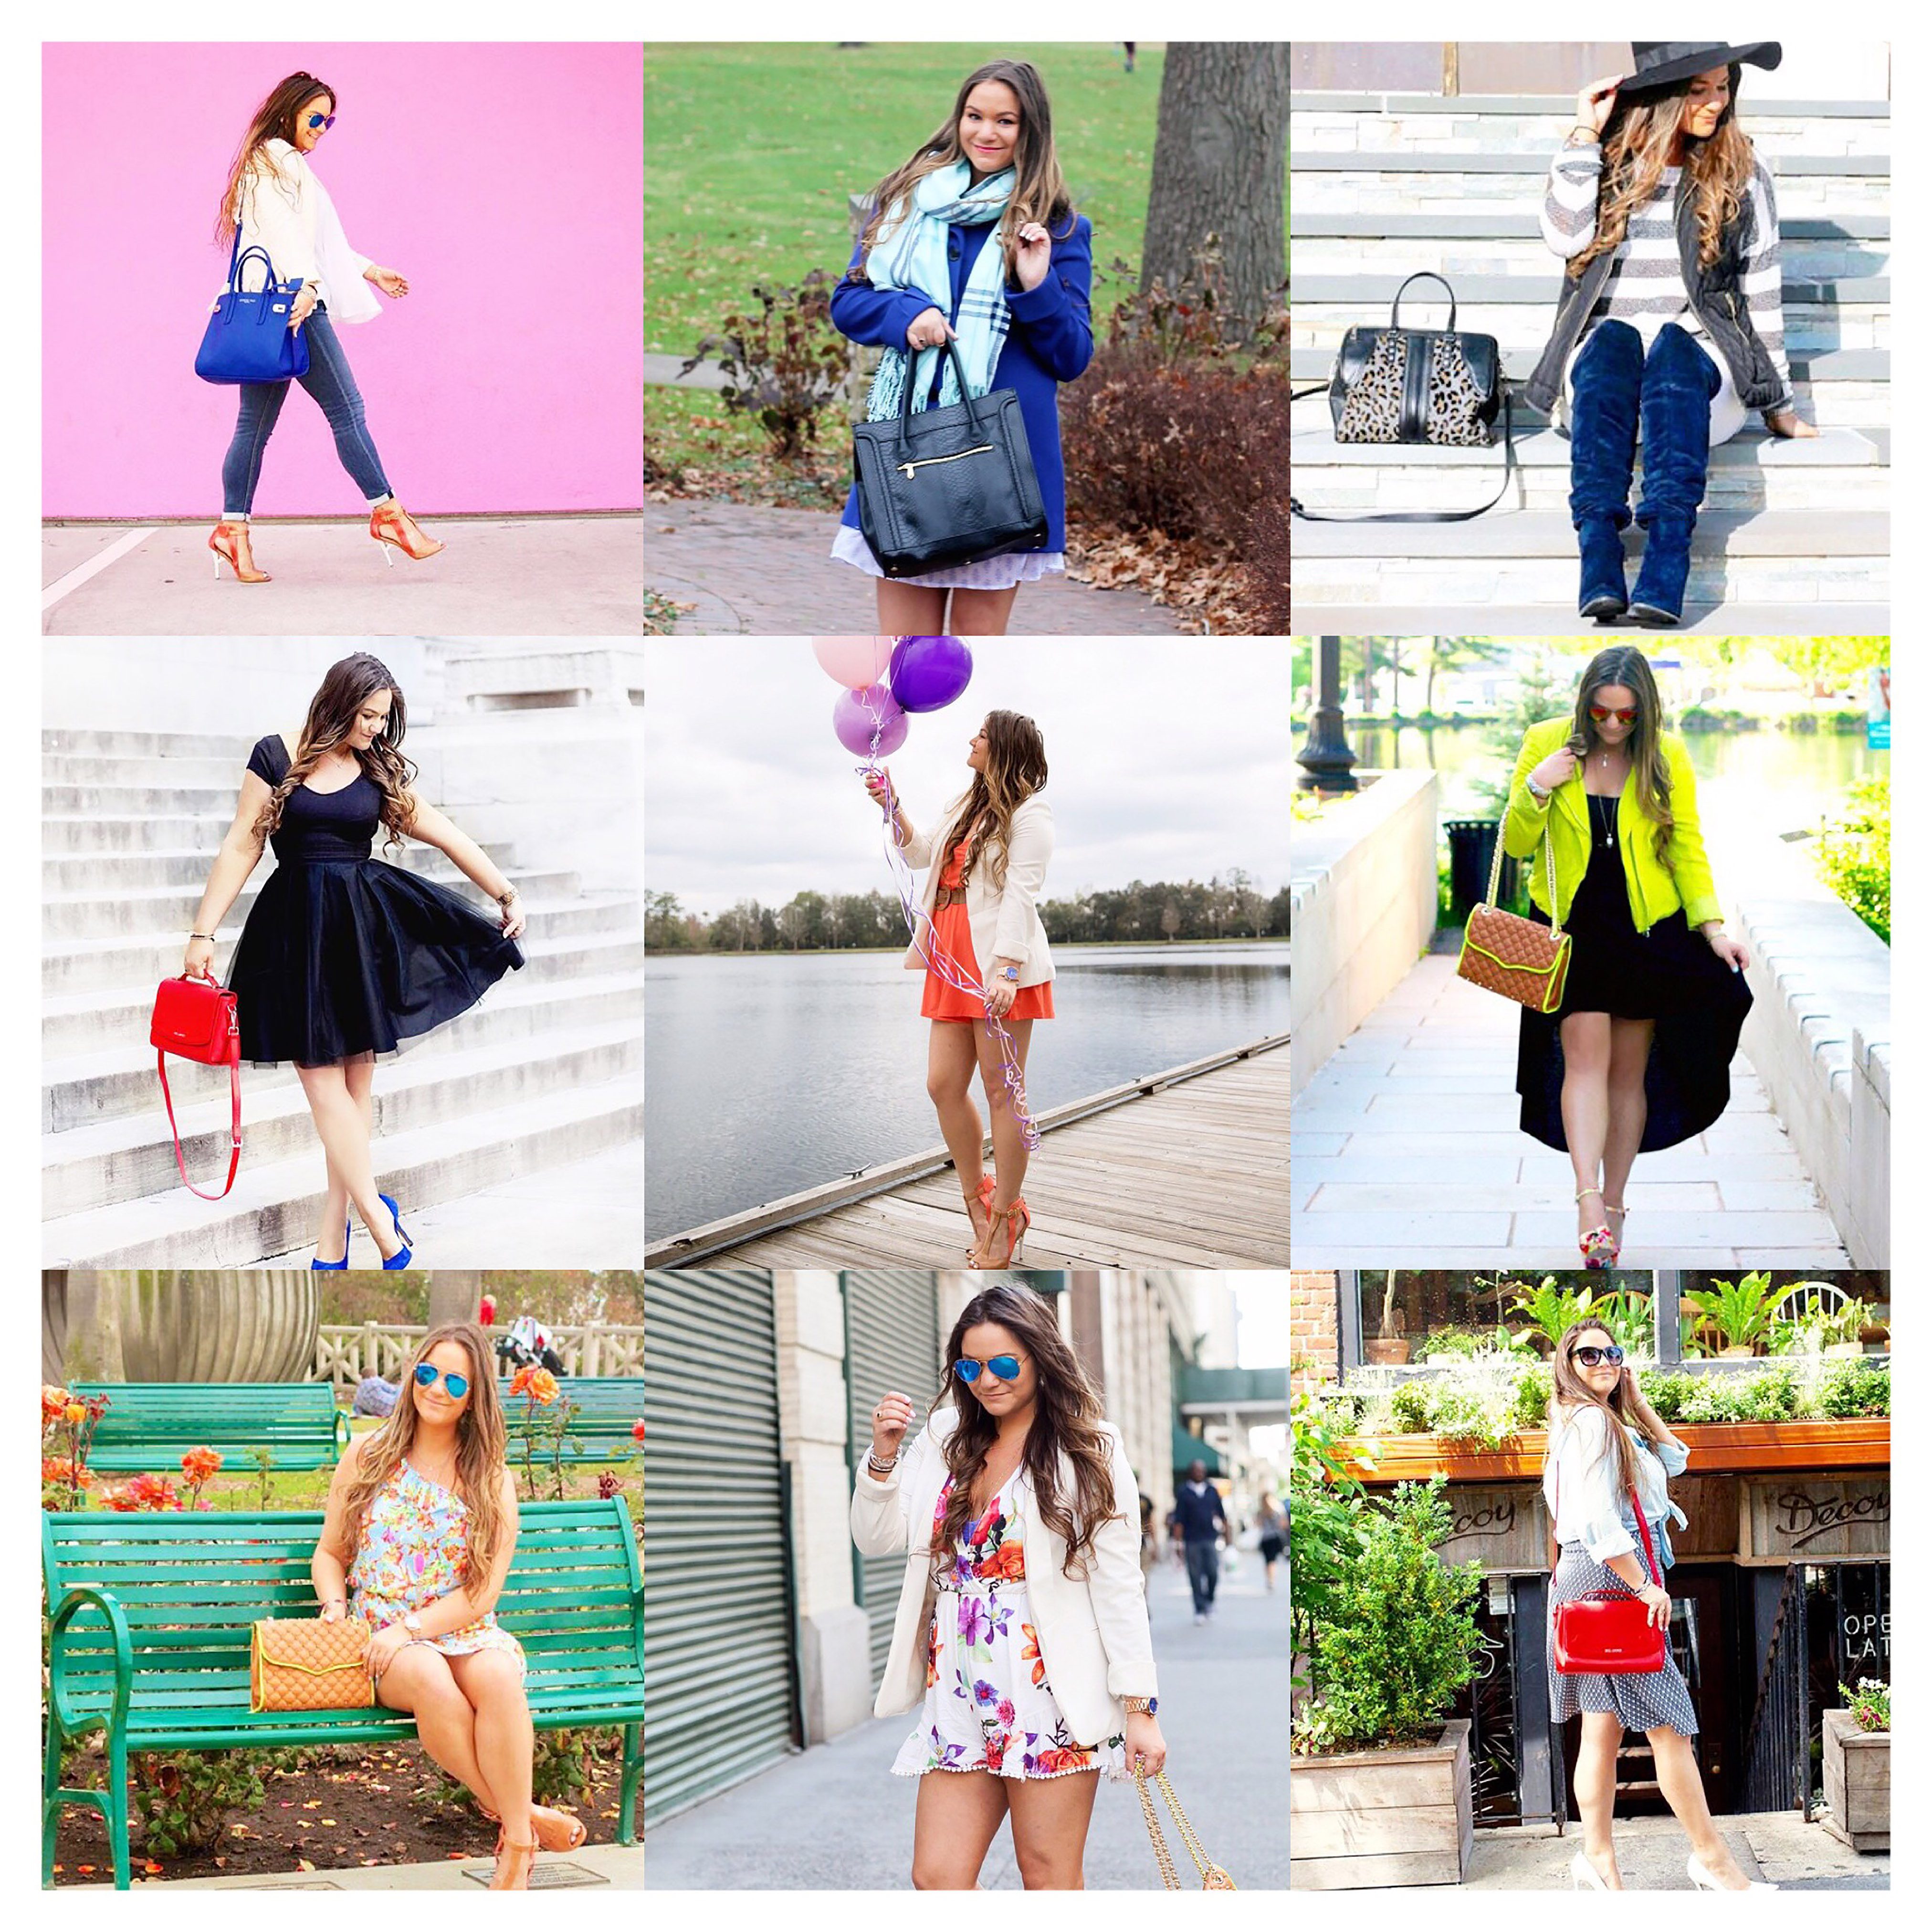 missyonmadison, melissa tierney, fashion blog, fashion blogger, best of 2015, nine best of 2015, 9 best of 2015, top 9 of 2015, style blog, outfit inspo, outfit goals, tulle skirt, romper, birthday outfit, nyc style, la style, vera bradley, colored heels, just fab, shoedazzle, outfit trends, asos, red lace up flats, new balance sneakers, black maxi dress, carolinna espinosa heels,